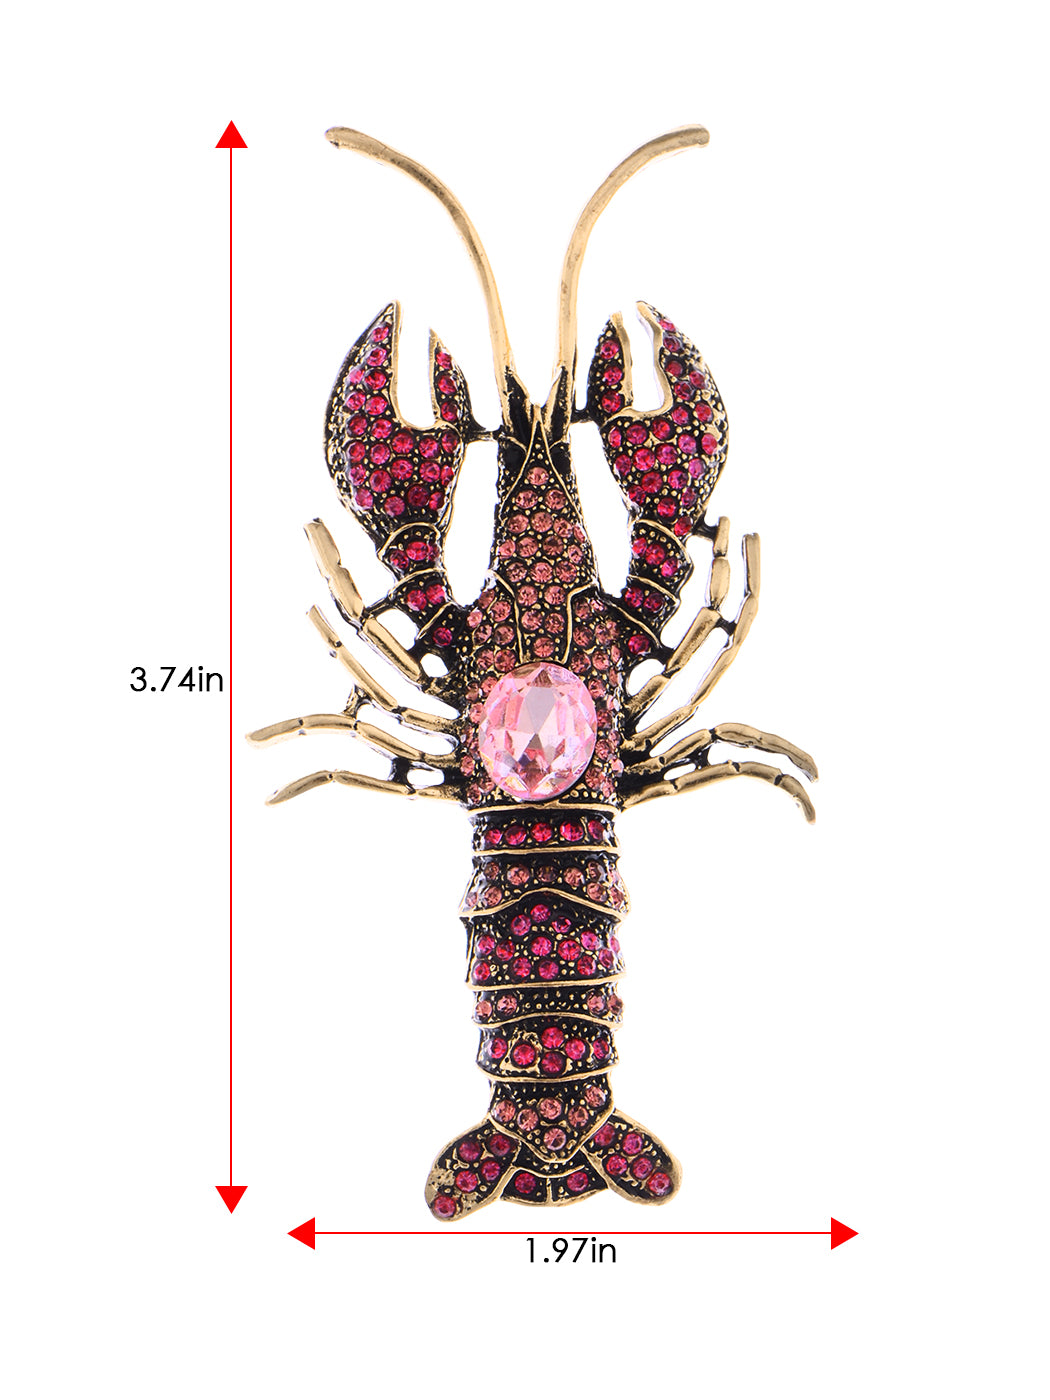 Nautical Ocean Animal Lobster Crawfish With Movable Tail Novelty Sea Fish Novelty Brooch Pin